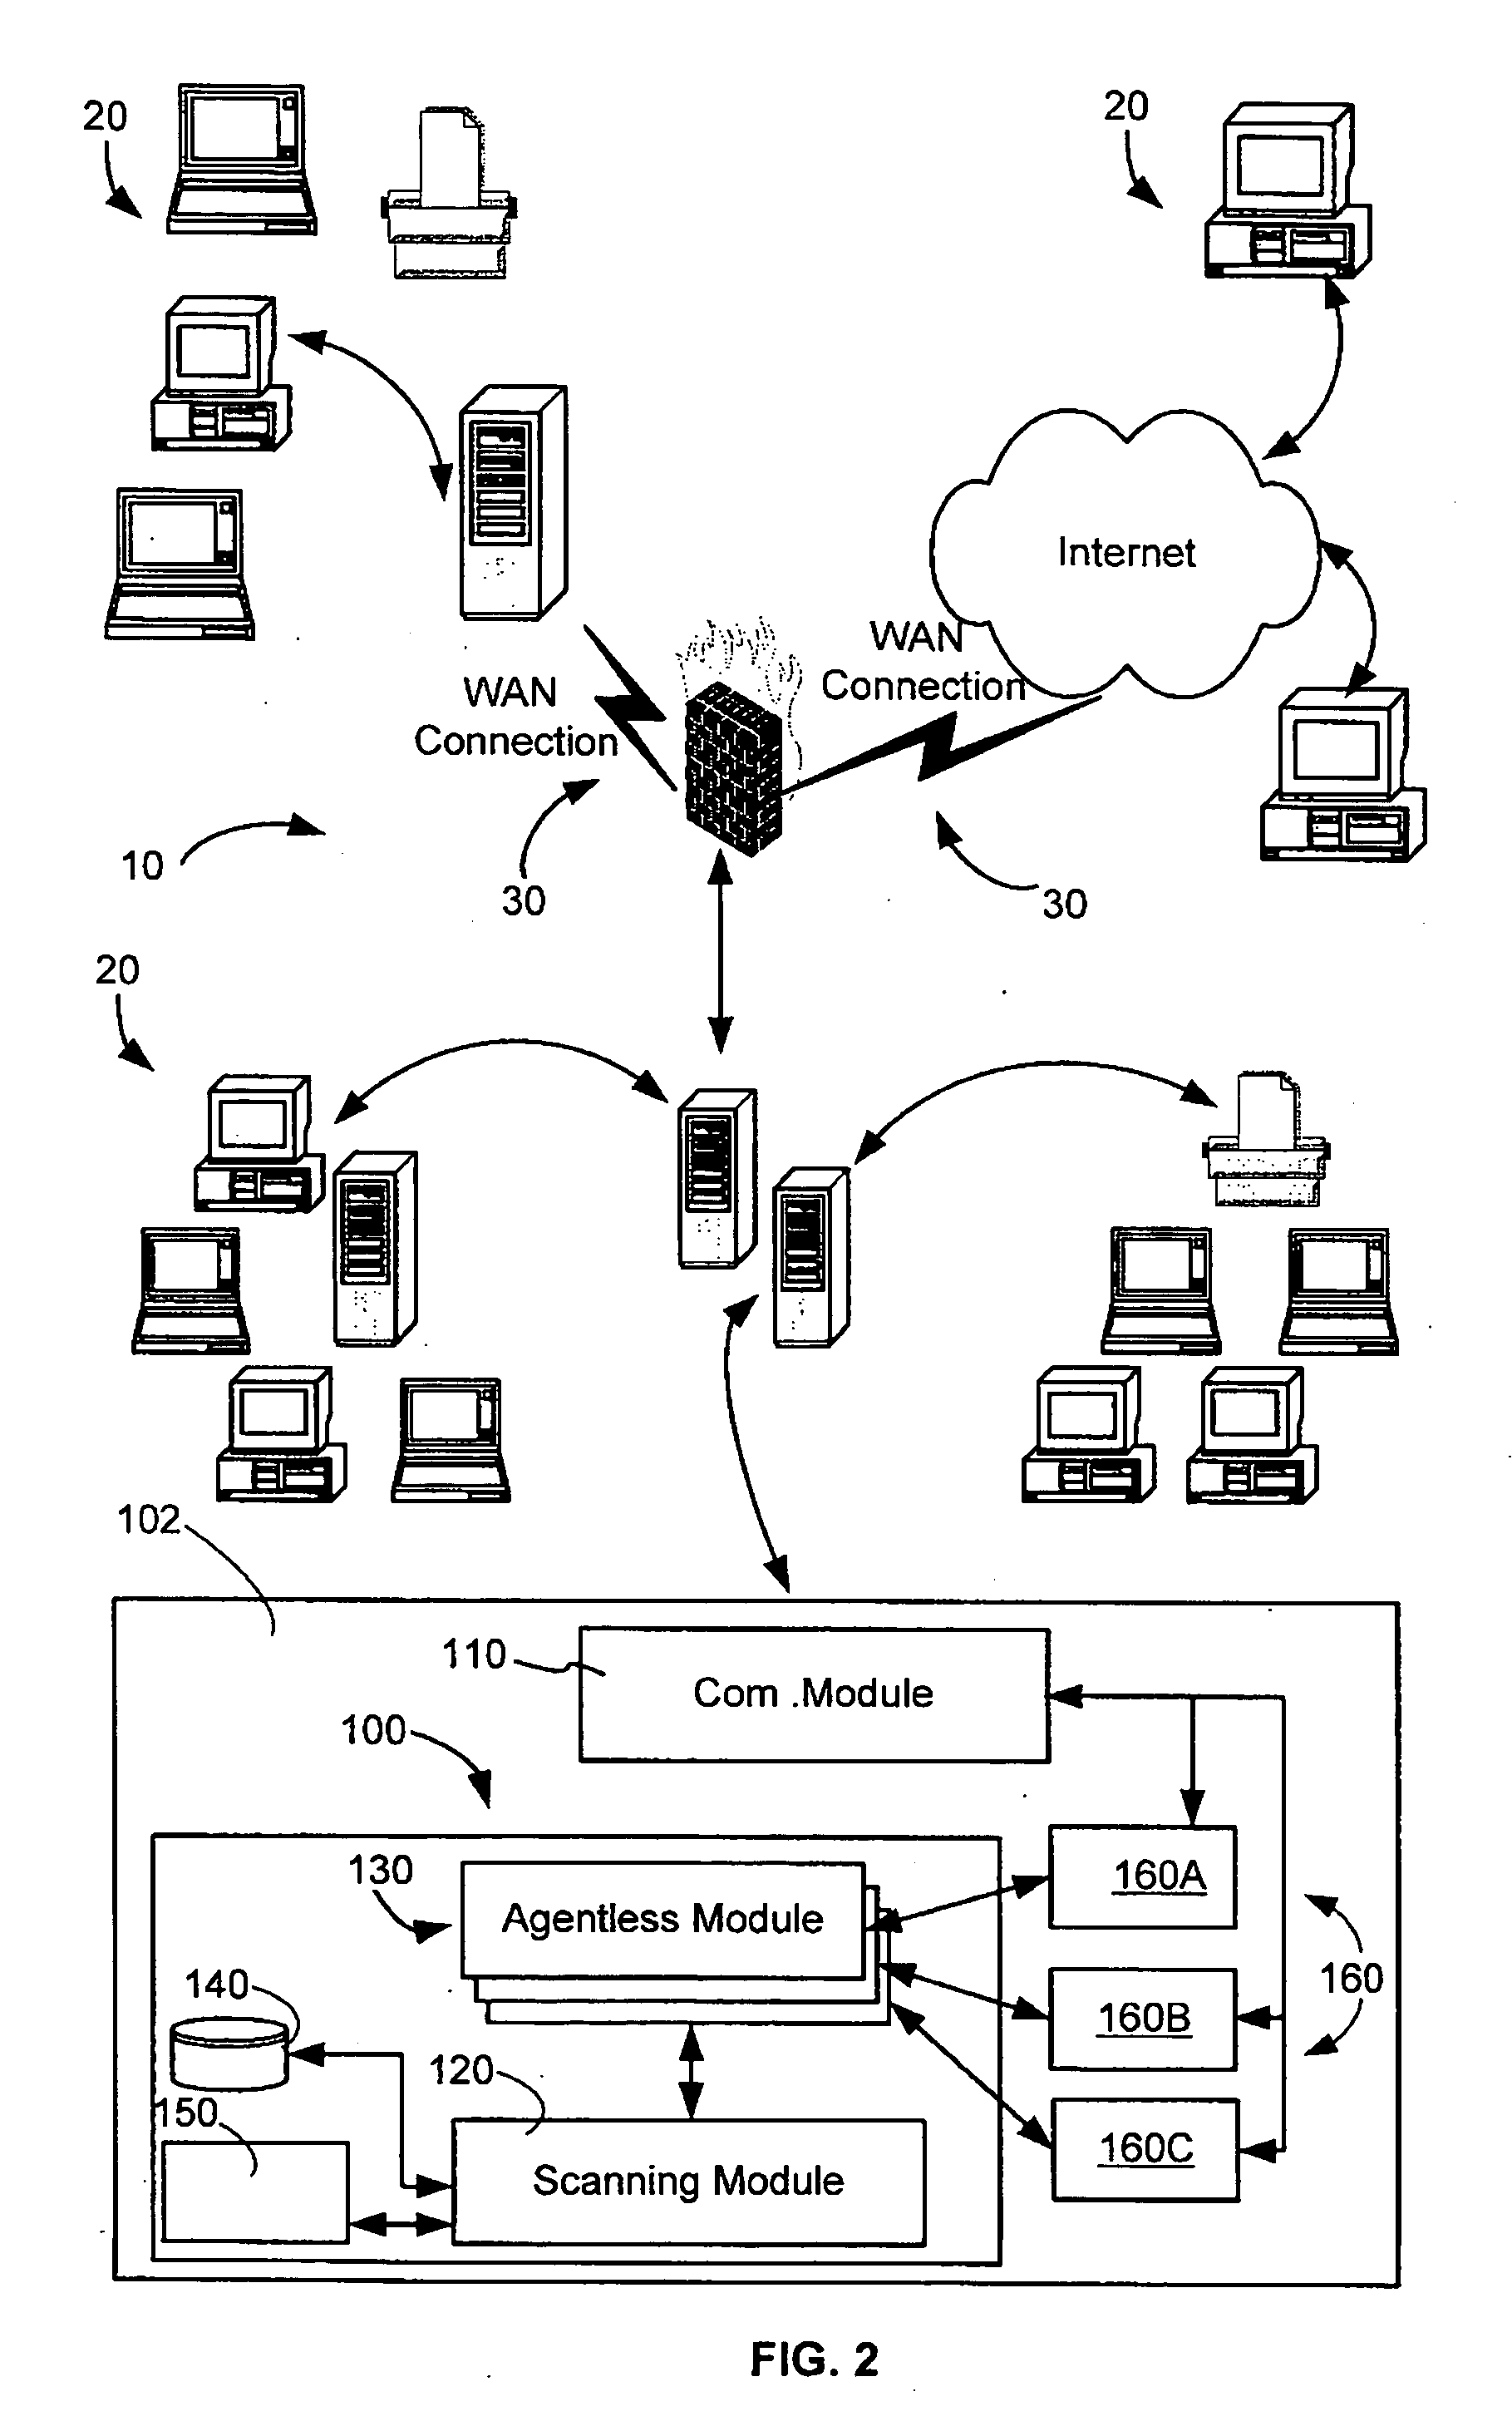 Method and device for scanning a plurality of computerized devices connected to a network